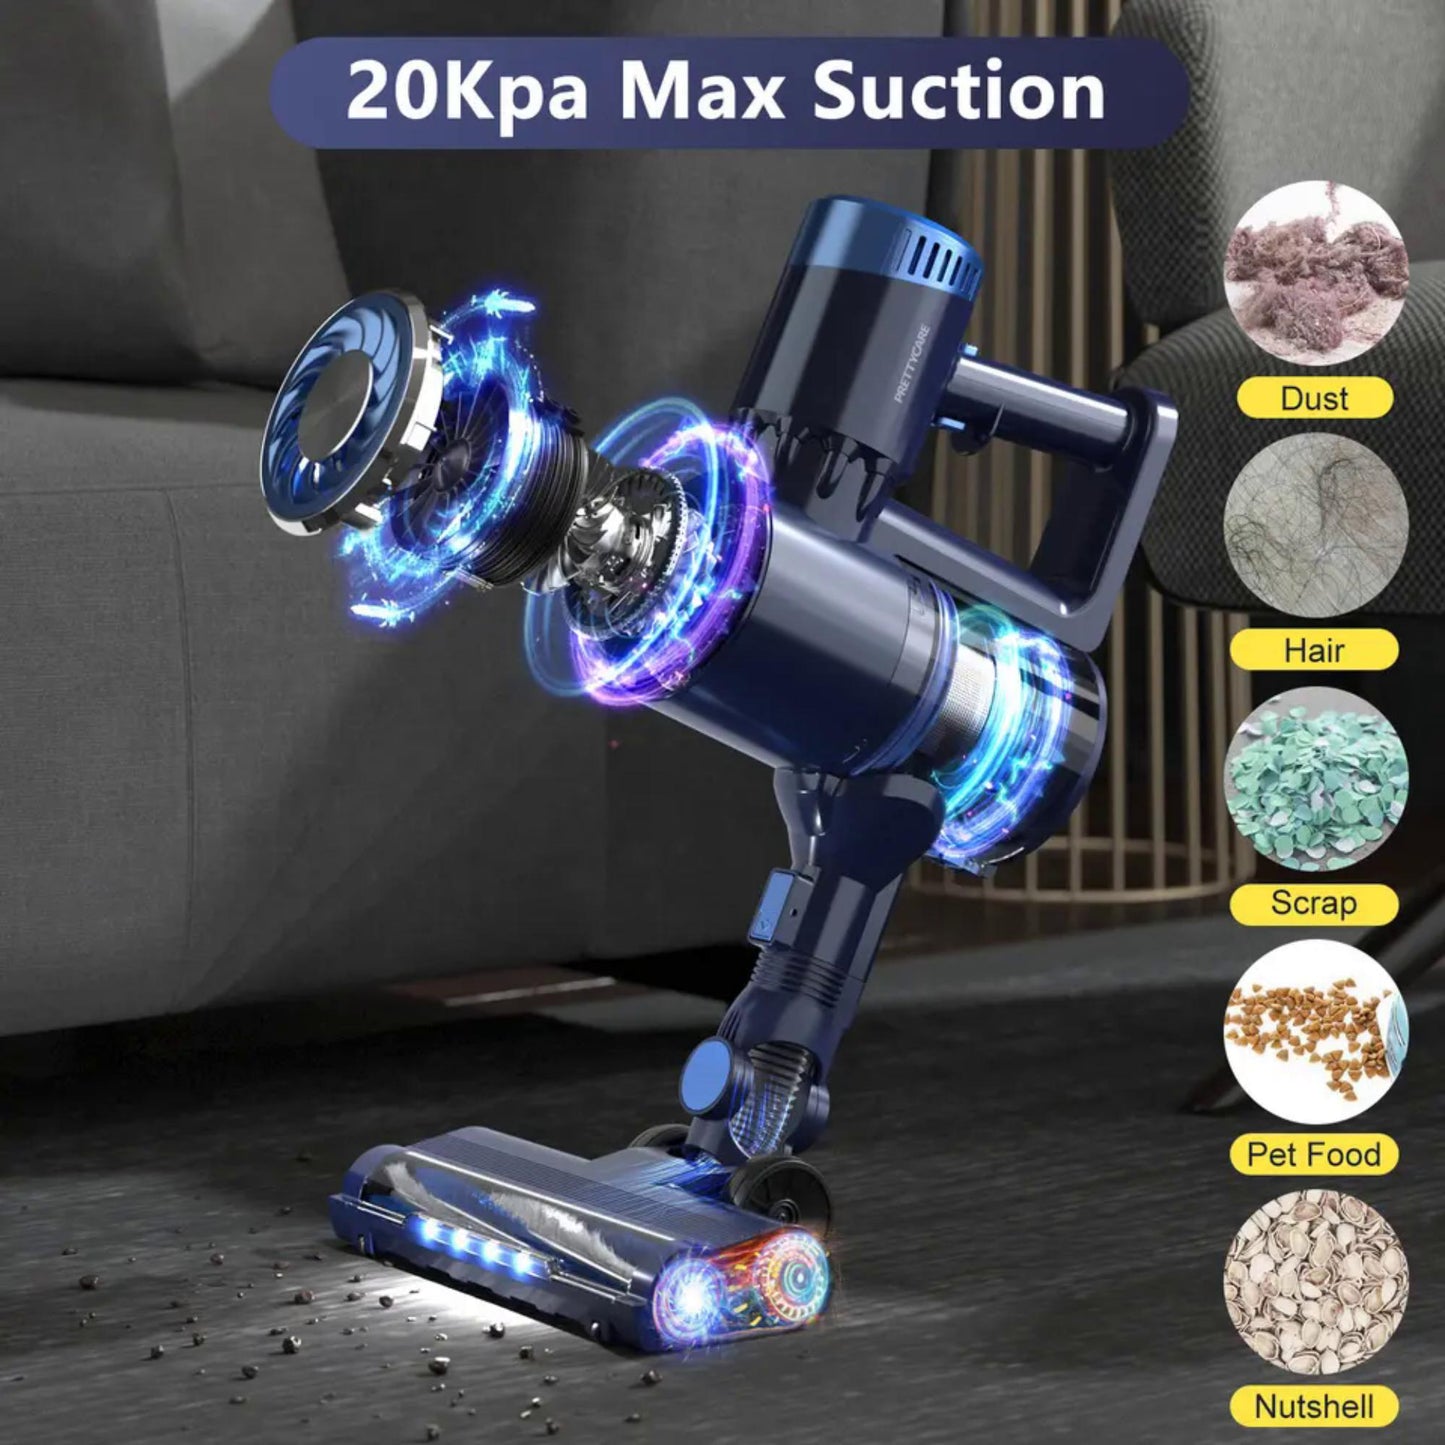 Pretty Care P3 Stick Vacuum Cleaner with 20 kPa Max Suction. | Blue Chilli Electronics.